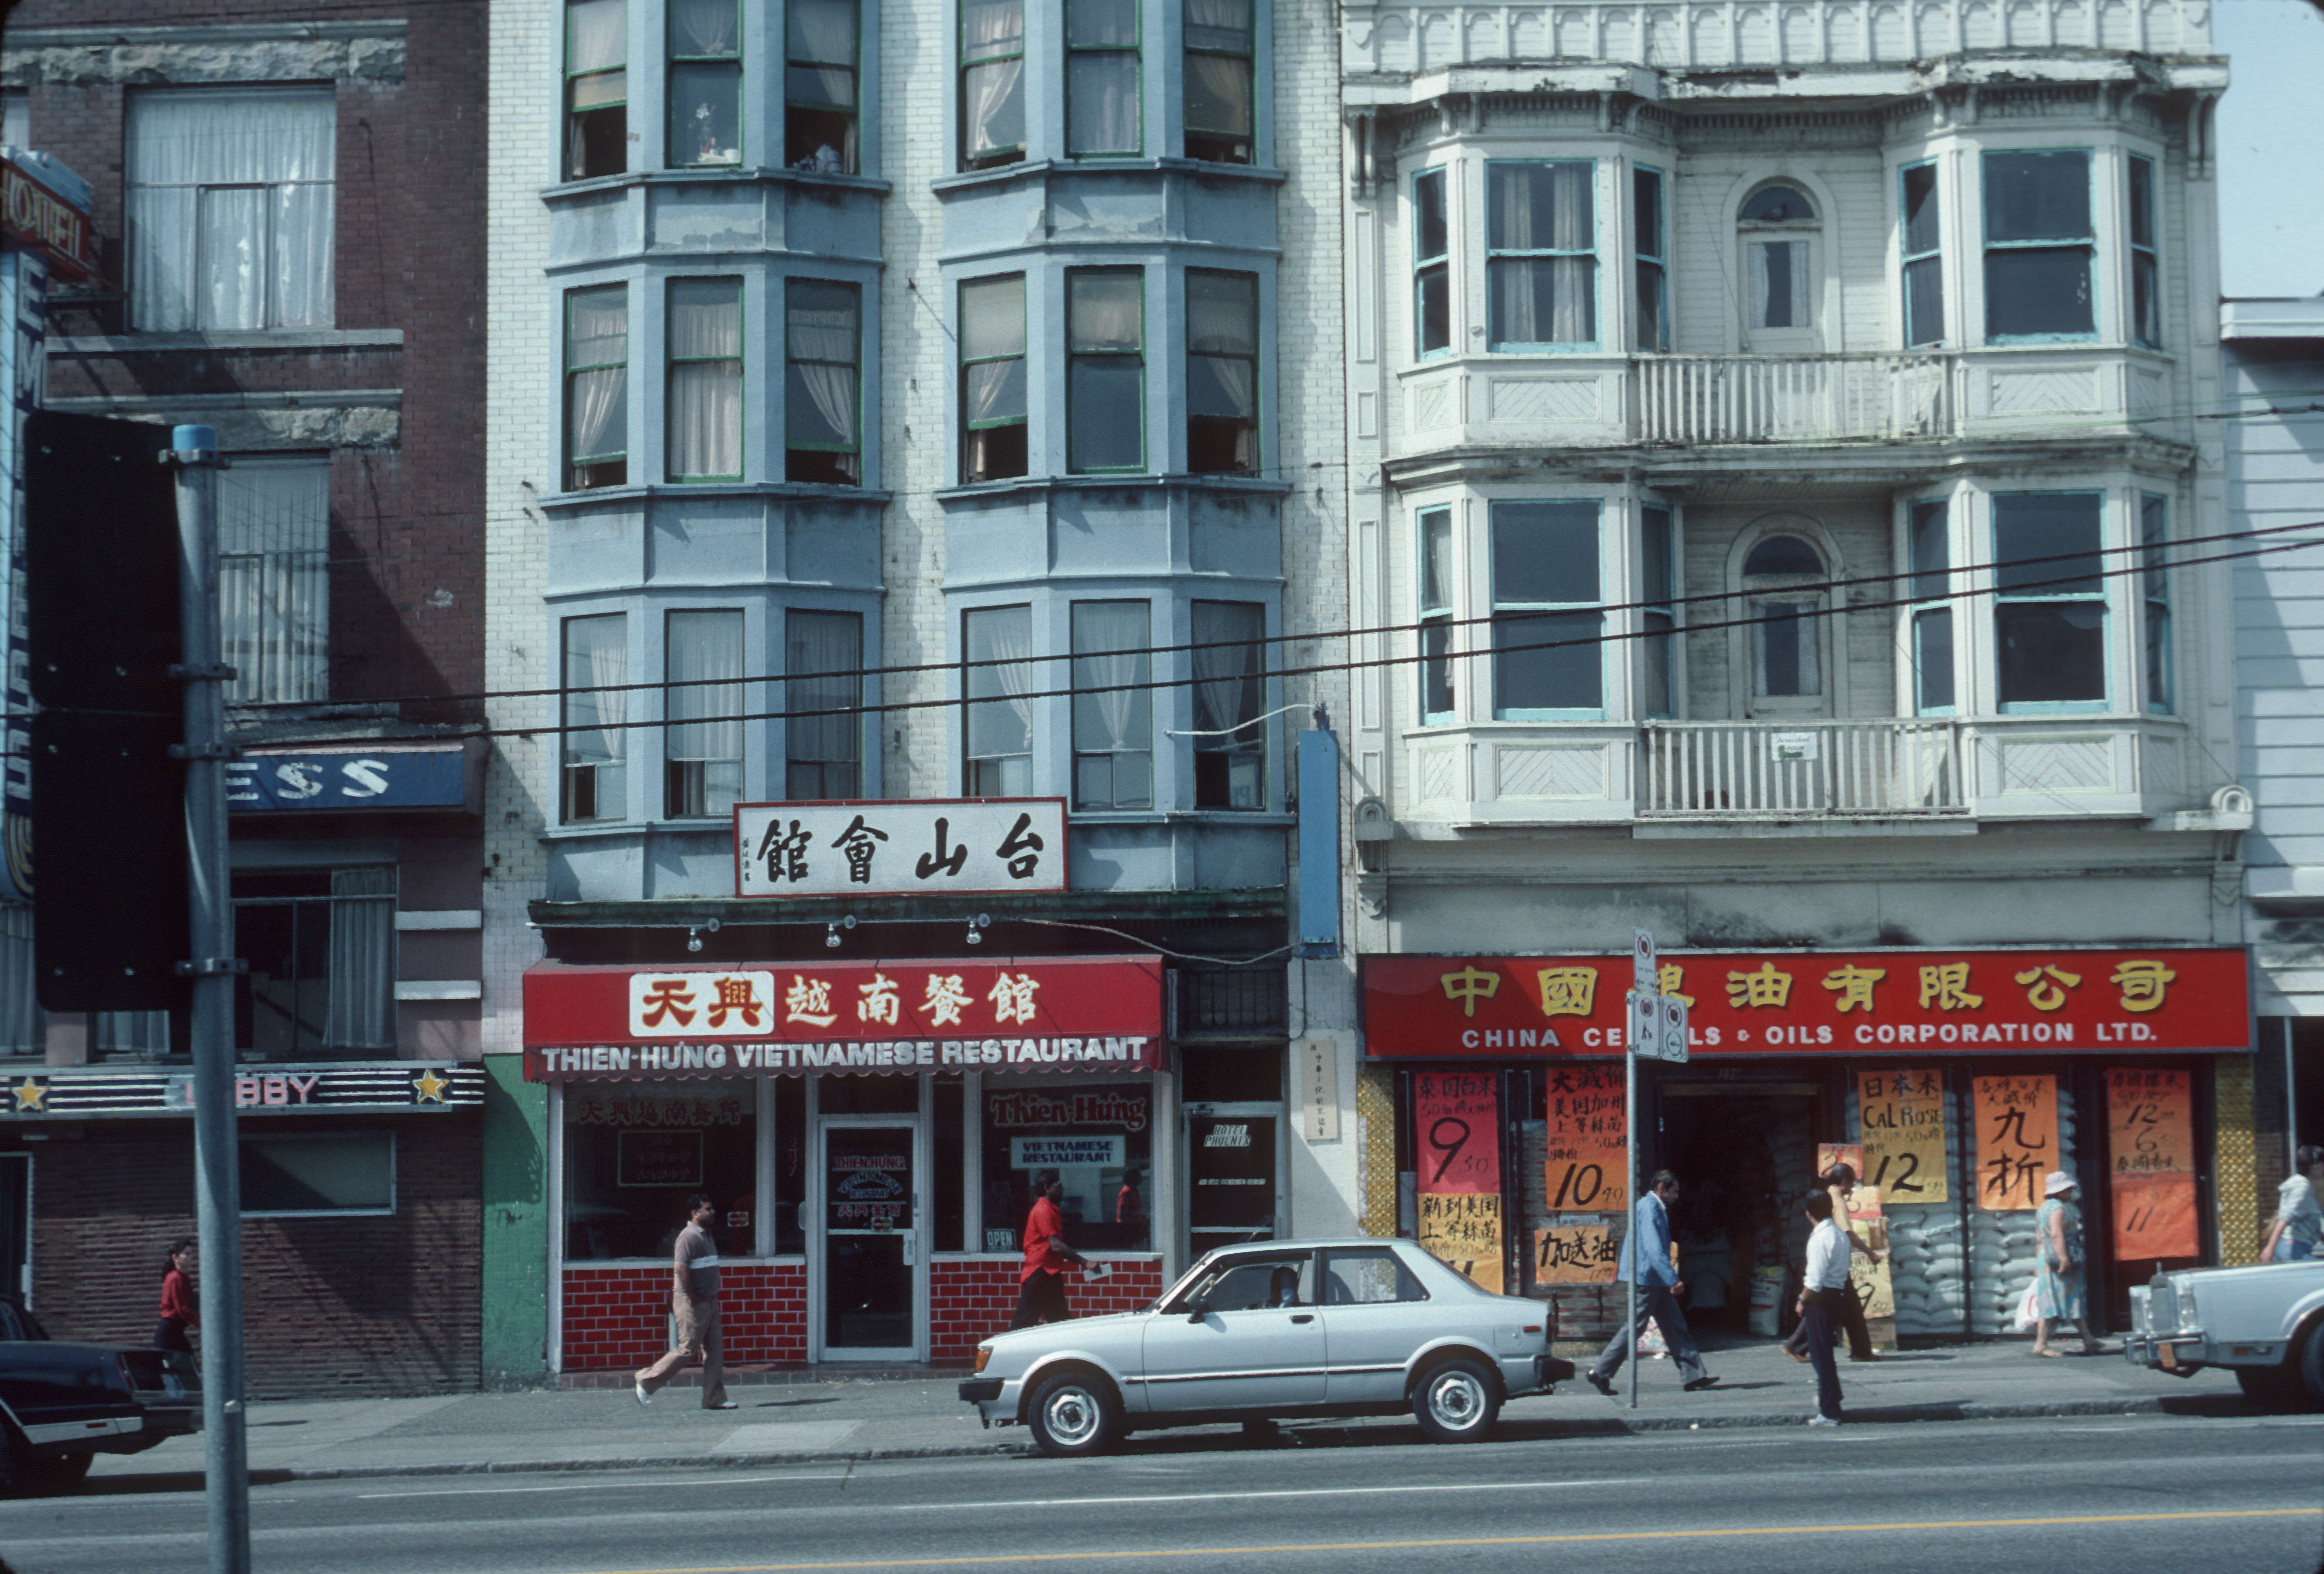 An archival photo awash in light blue colourways depicts a row of low-rise apartment buildings along the 200 block of East Hastings Street in Vancouver, 1986. The horizontal red signs above the doors of stores on the ground floors feature signage in Vietnamese and Chinese.